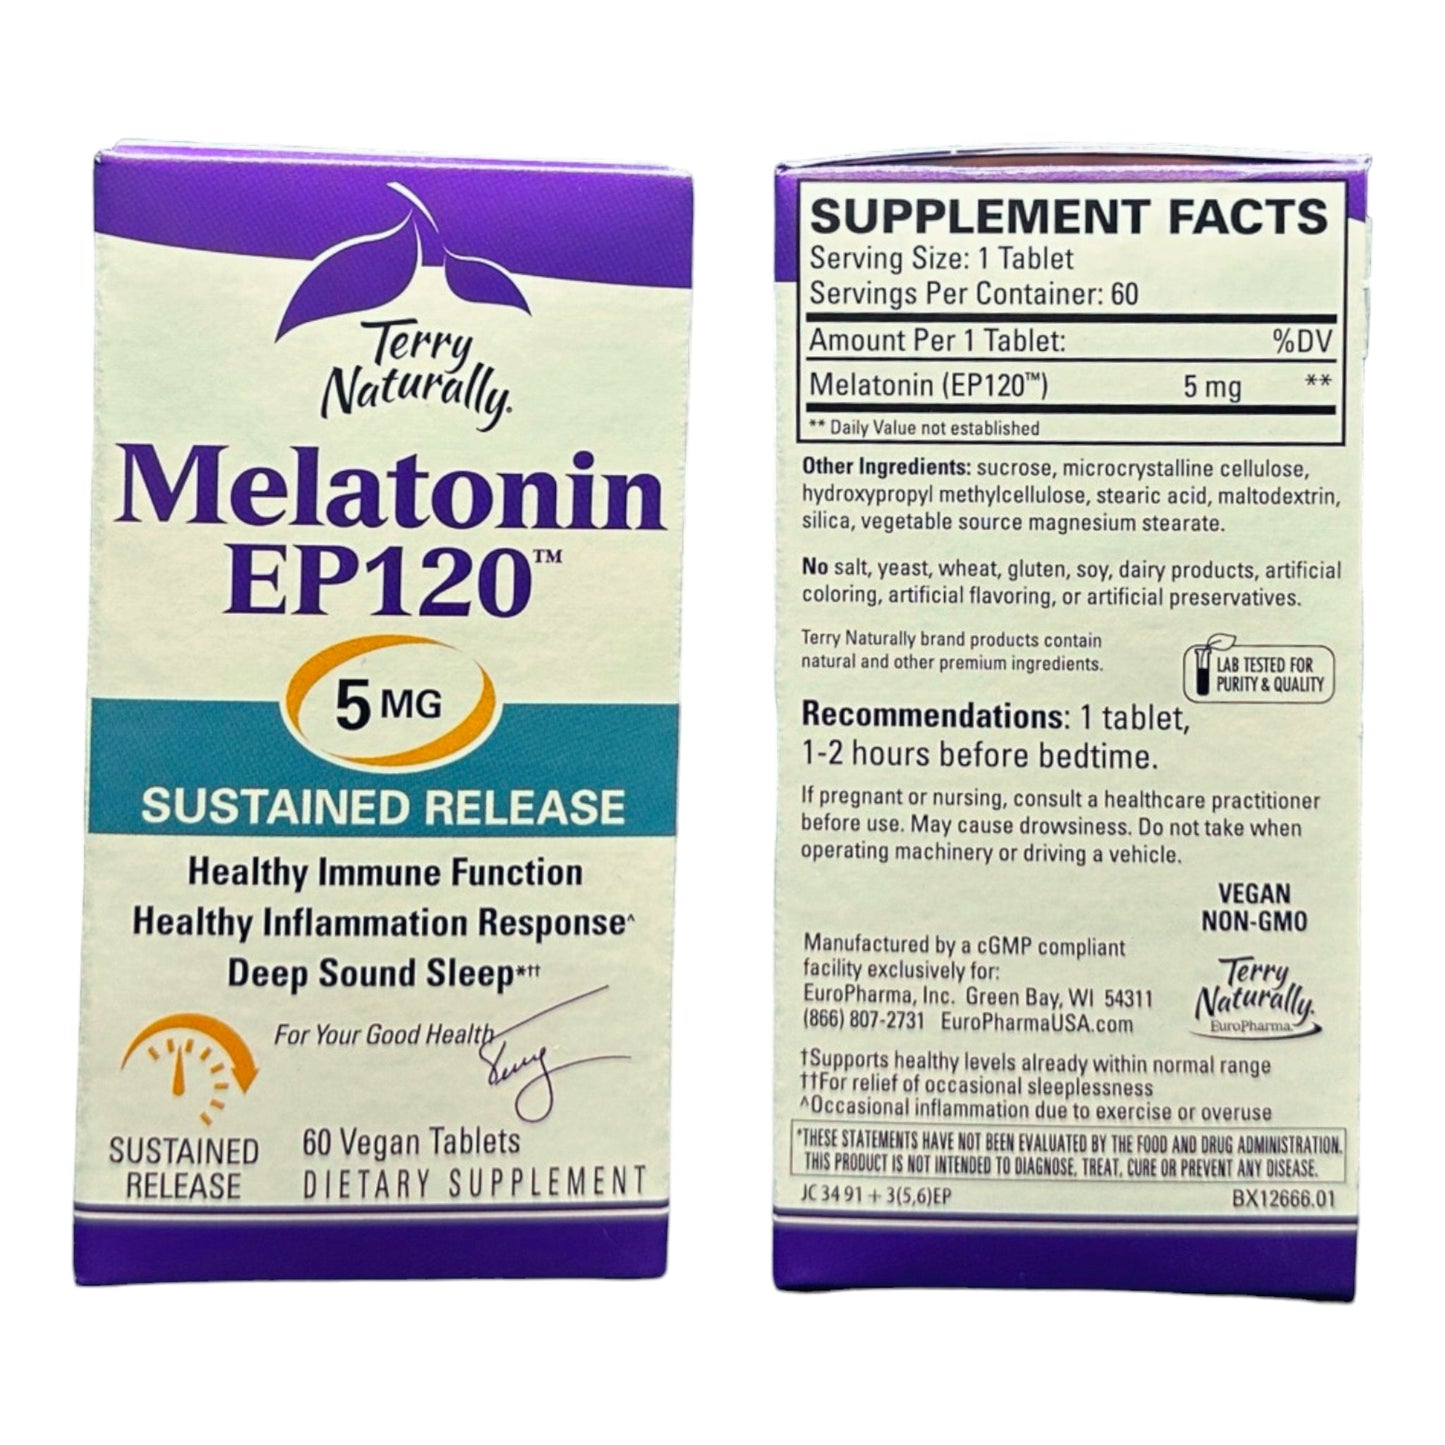 TERRY NATURALLY - MELATONIN EP120 - 5MG - SUSTAINED RELEASE - The Vault